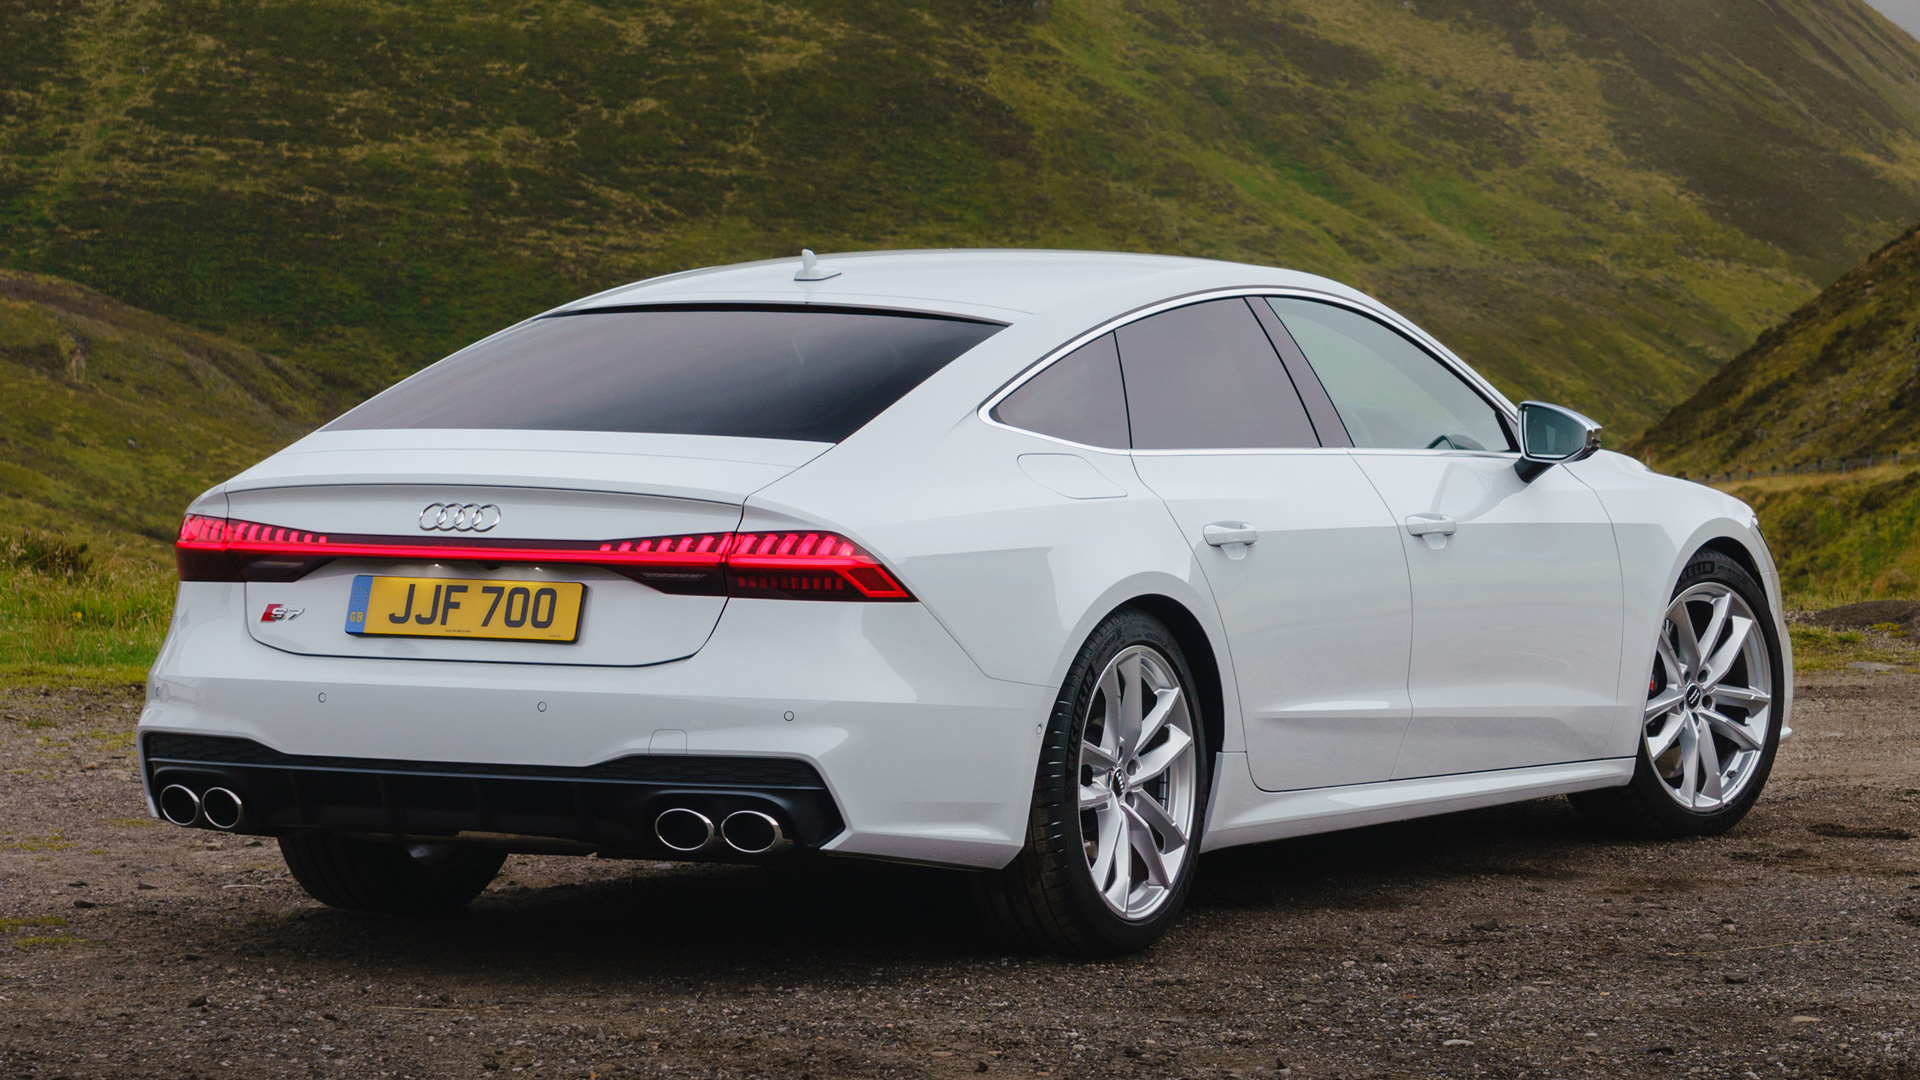 HD Audi S7 Sportback Android Images